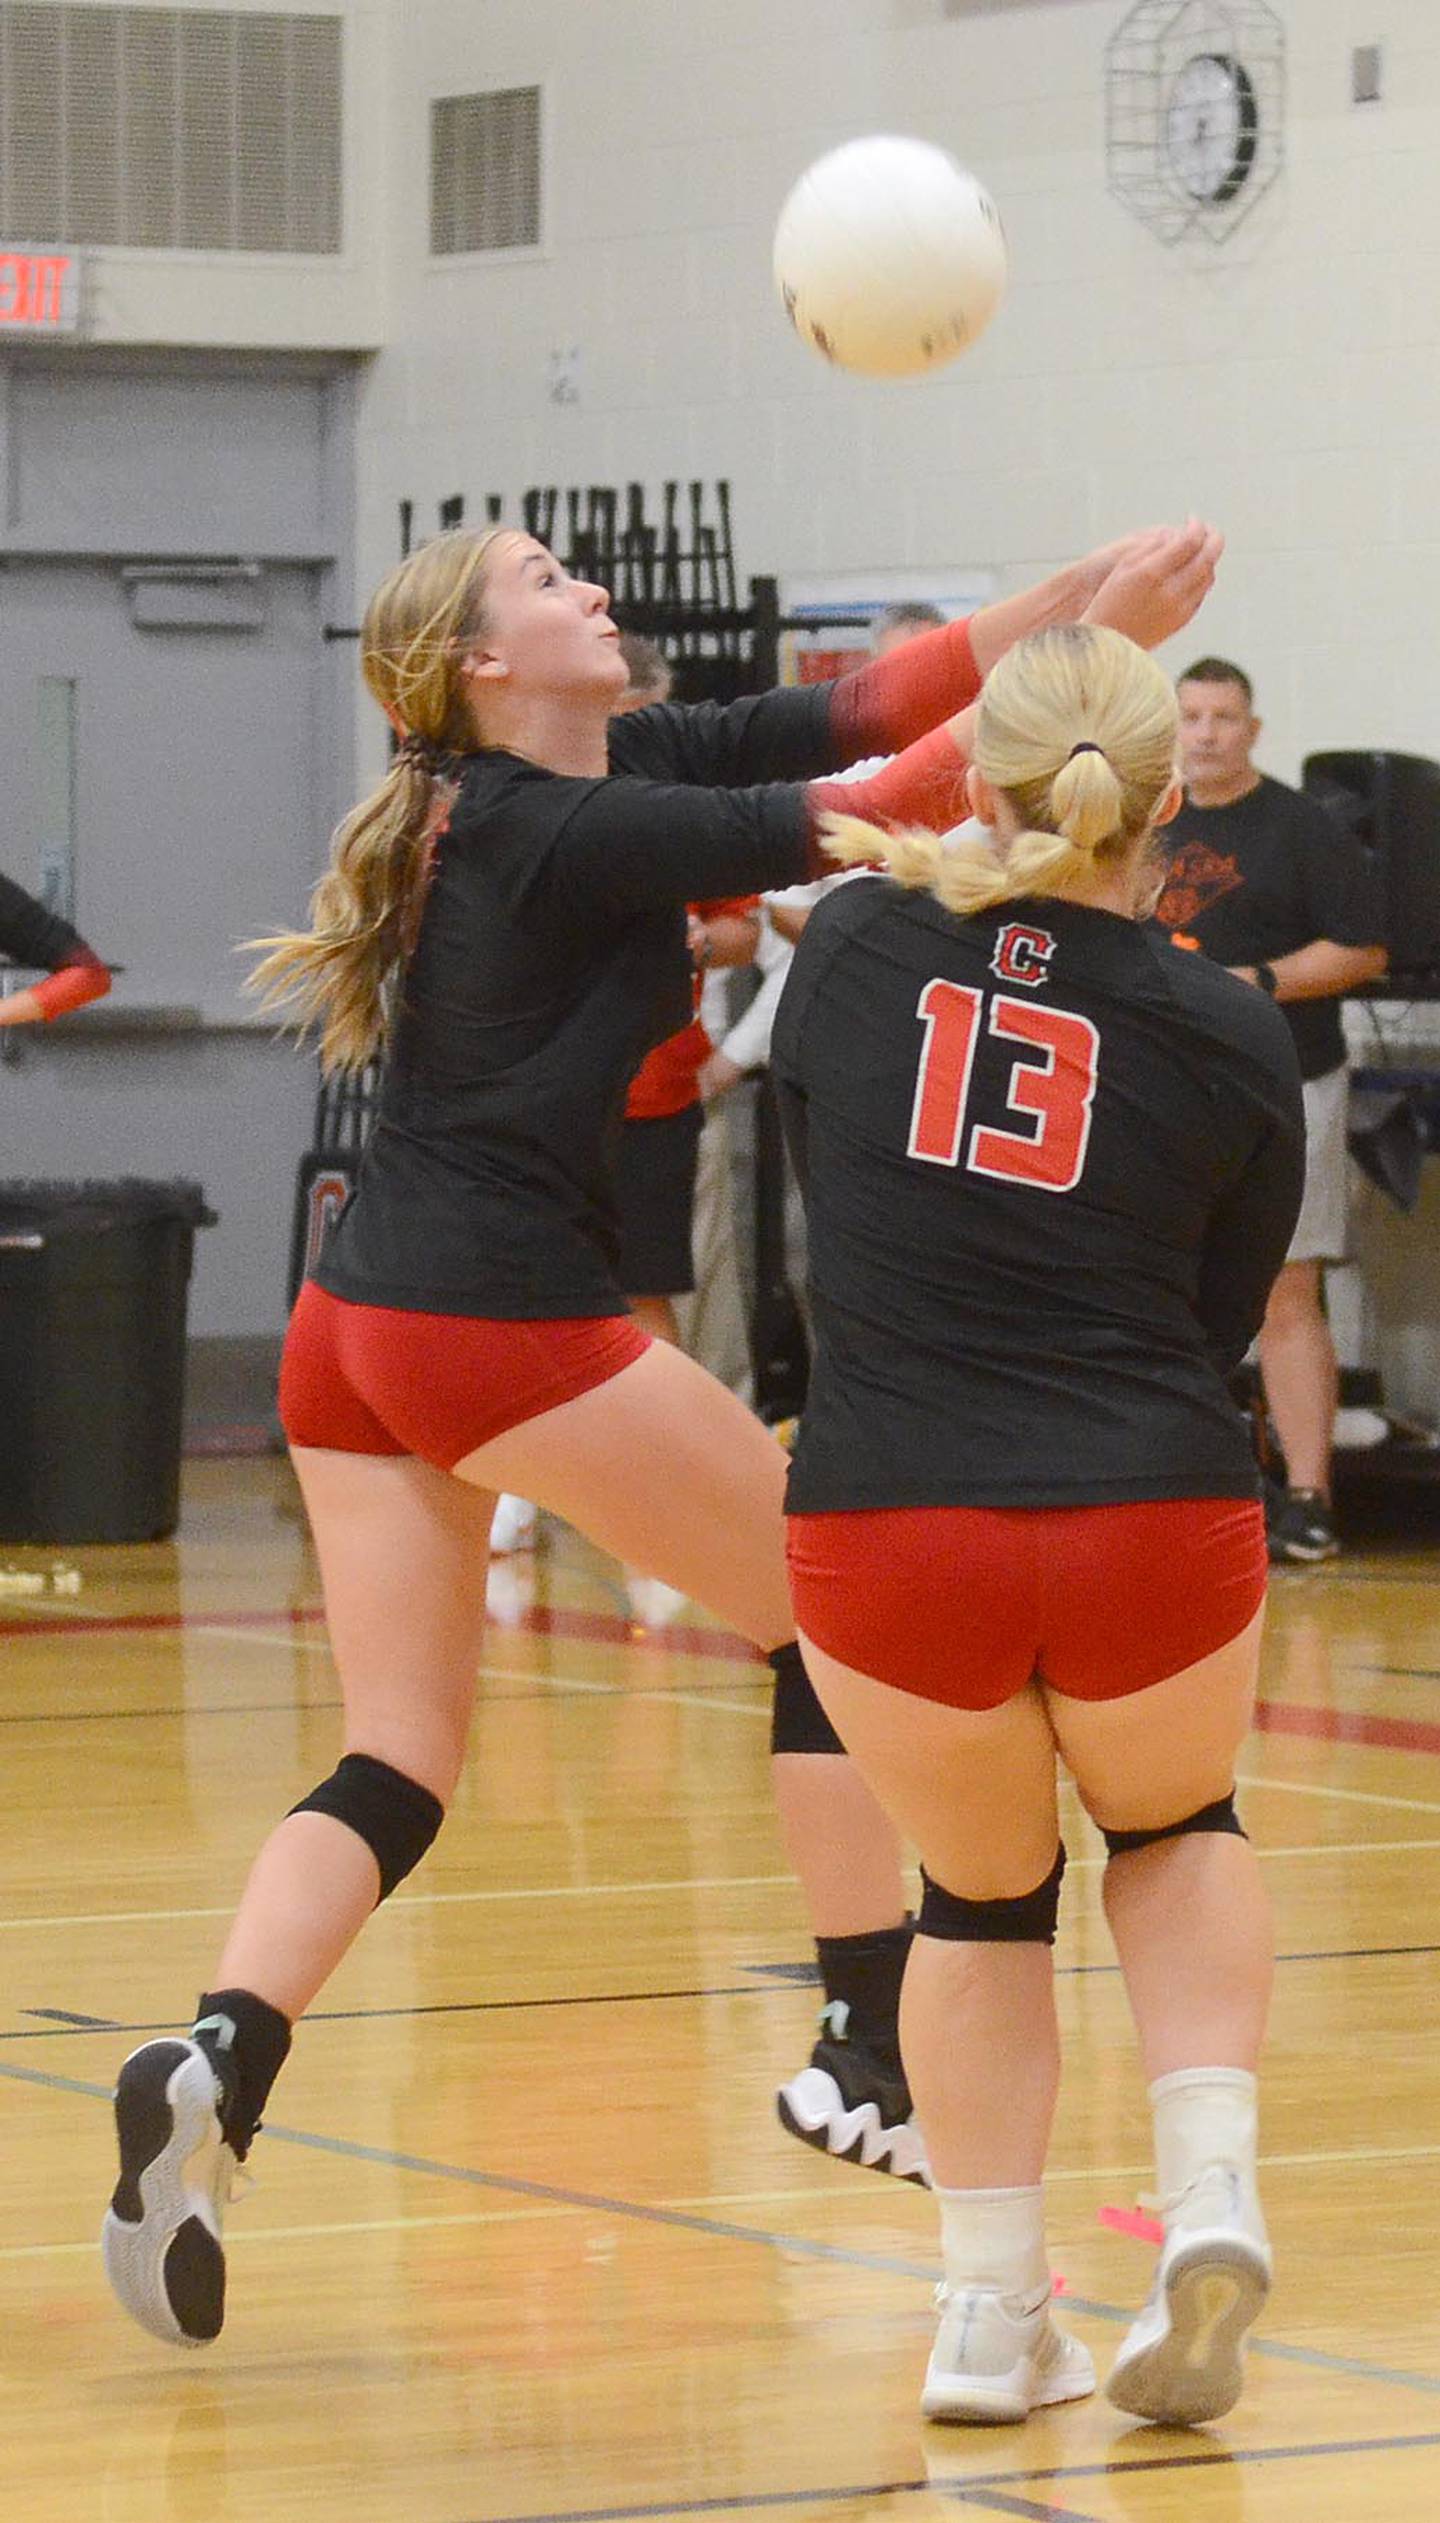 Kolbey Bailey and Jaycee Hanson (13) converge for a save near the back line against Red Oak Thursday. Bailey had five digs and four kills in the 3-0 loss.